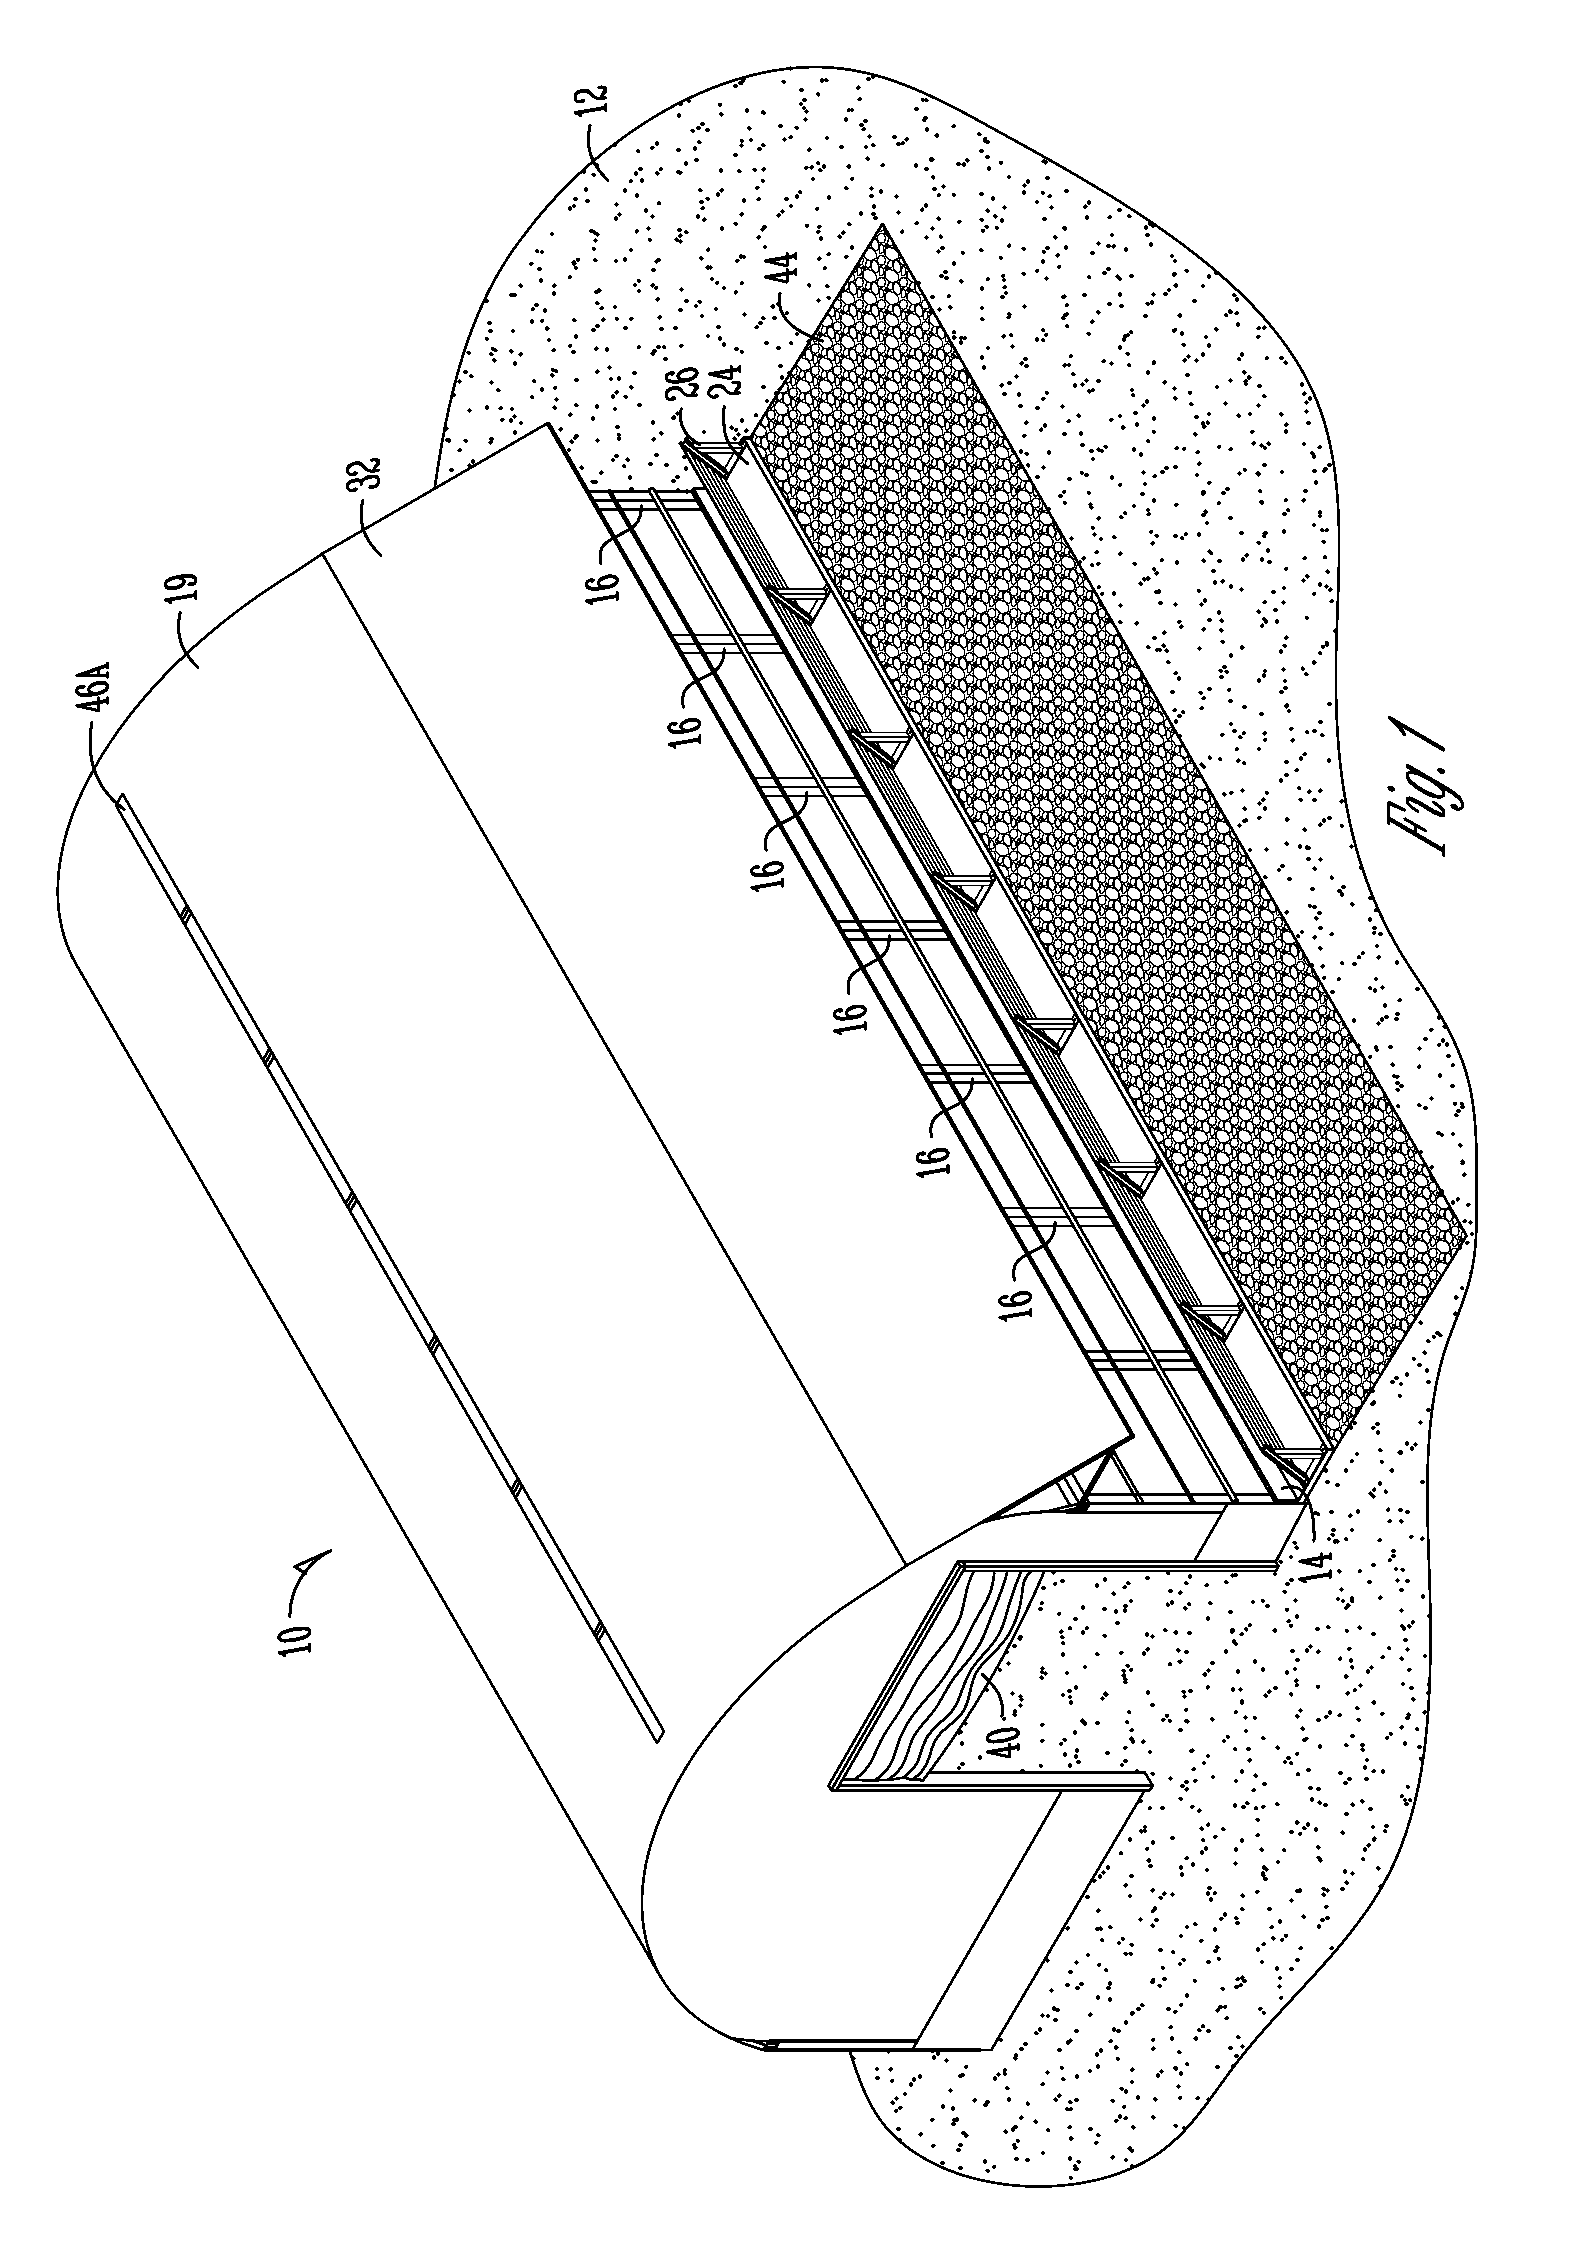 Cattle feeding system and shelter to create a controlled environment within the thermal neutral zone